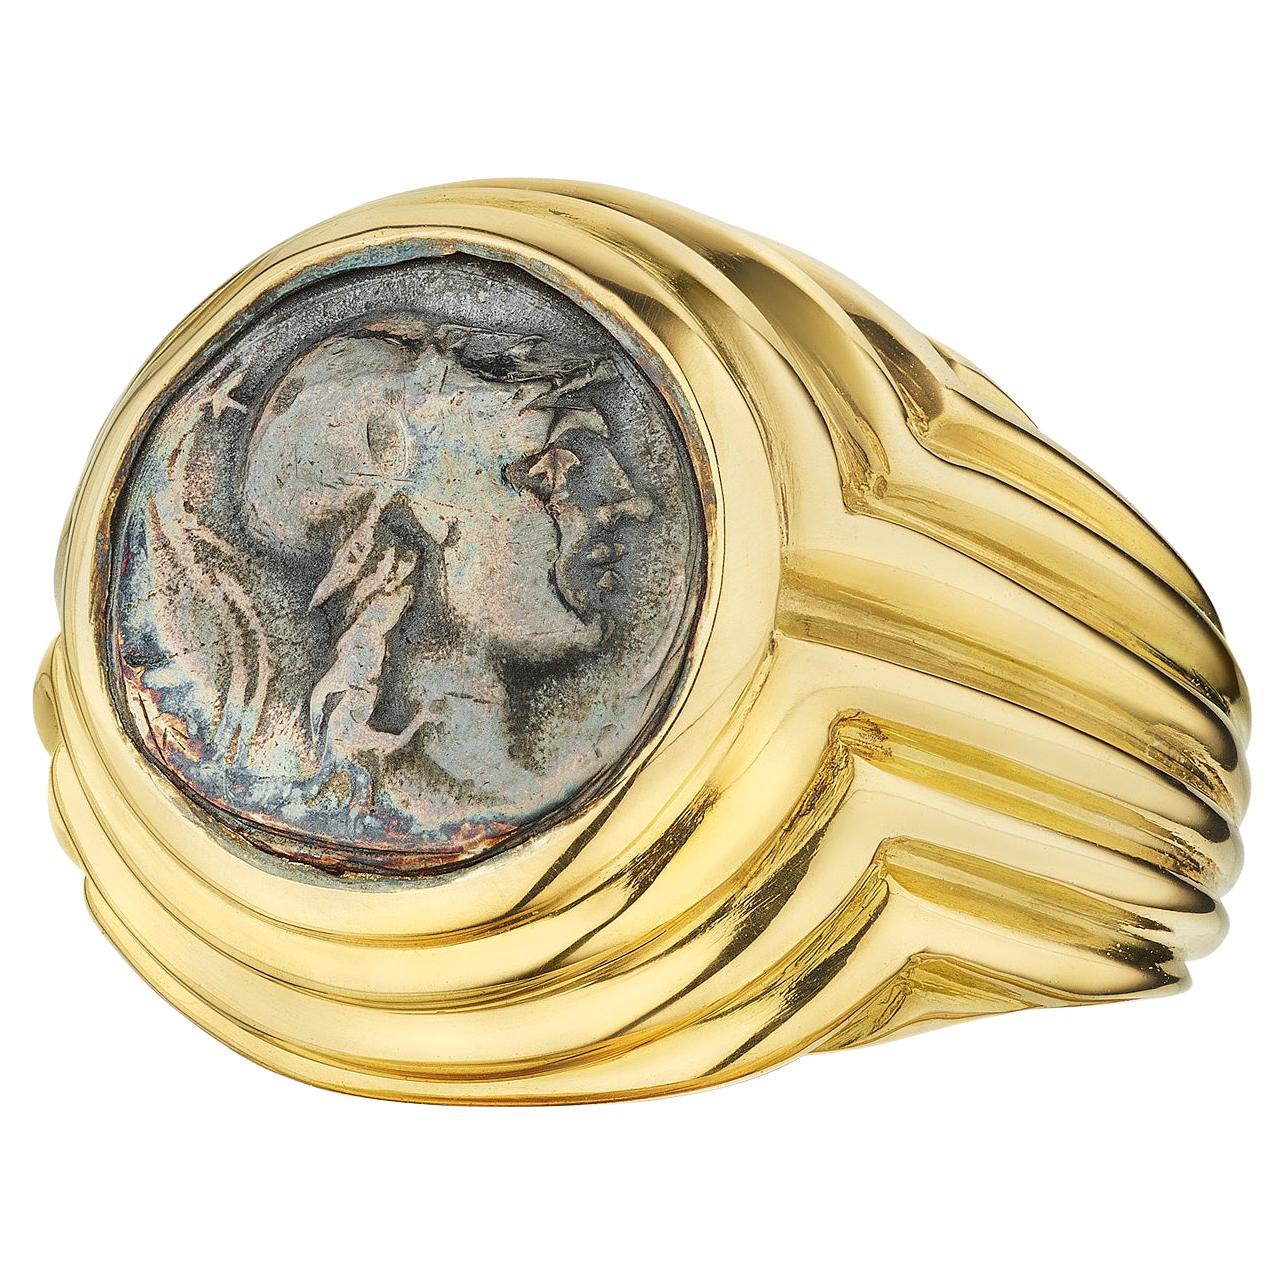 Bulgari Second Century Greek Coin Vintage Gold Dome Ring